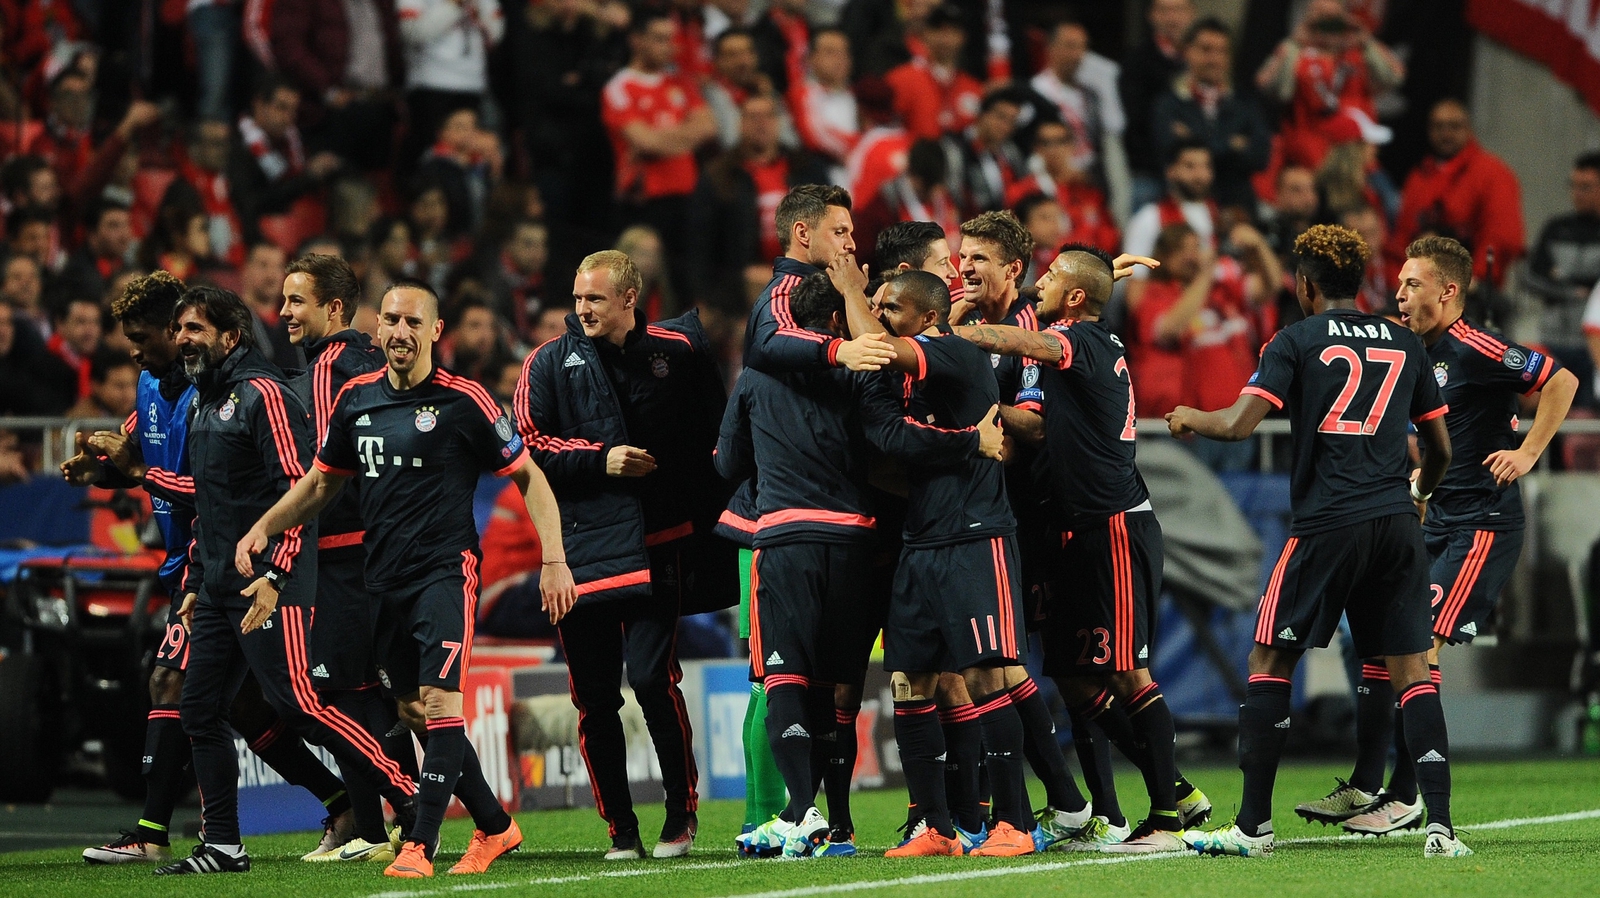 Bayern beat Benfica to march into semis